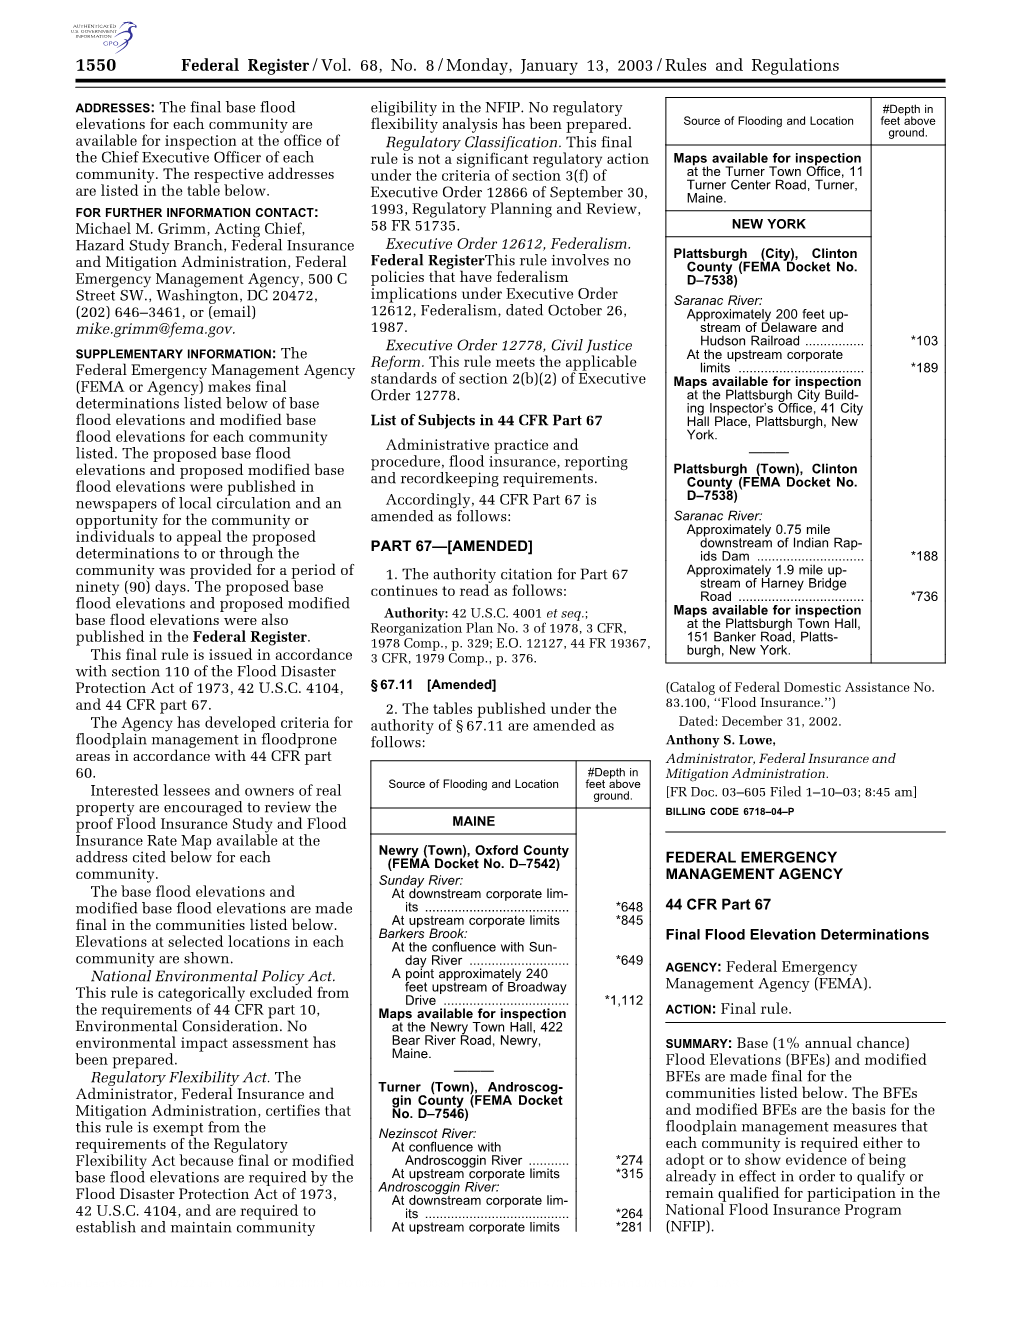 Federal Register/Vol. 68, No. 8/Monday, January 13, 2003/Rules